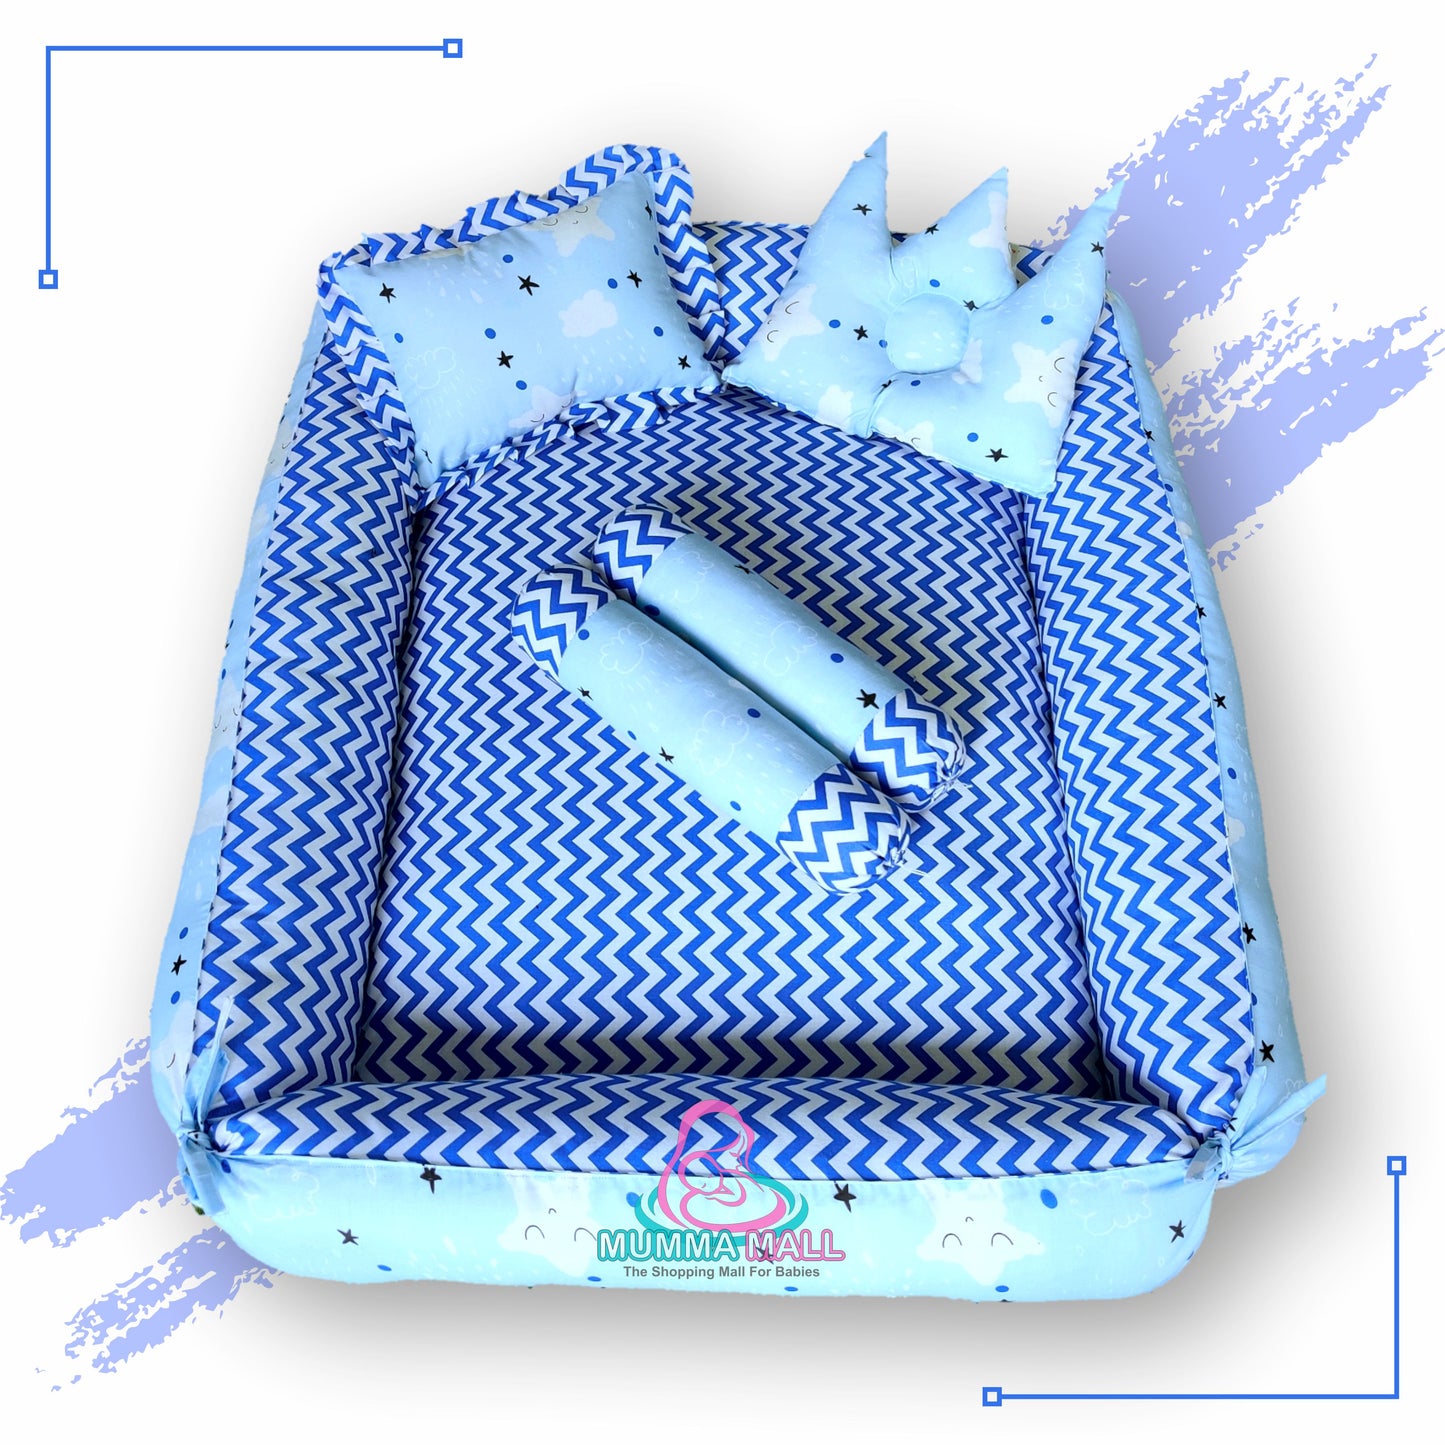 Baby box mattress set with set of 4 pillows as neck support, side support and toy (Sky and Blue)